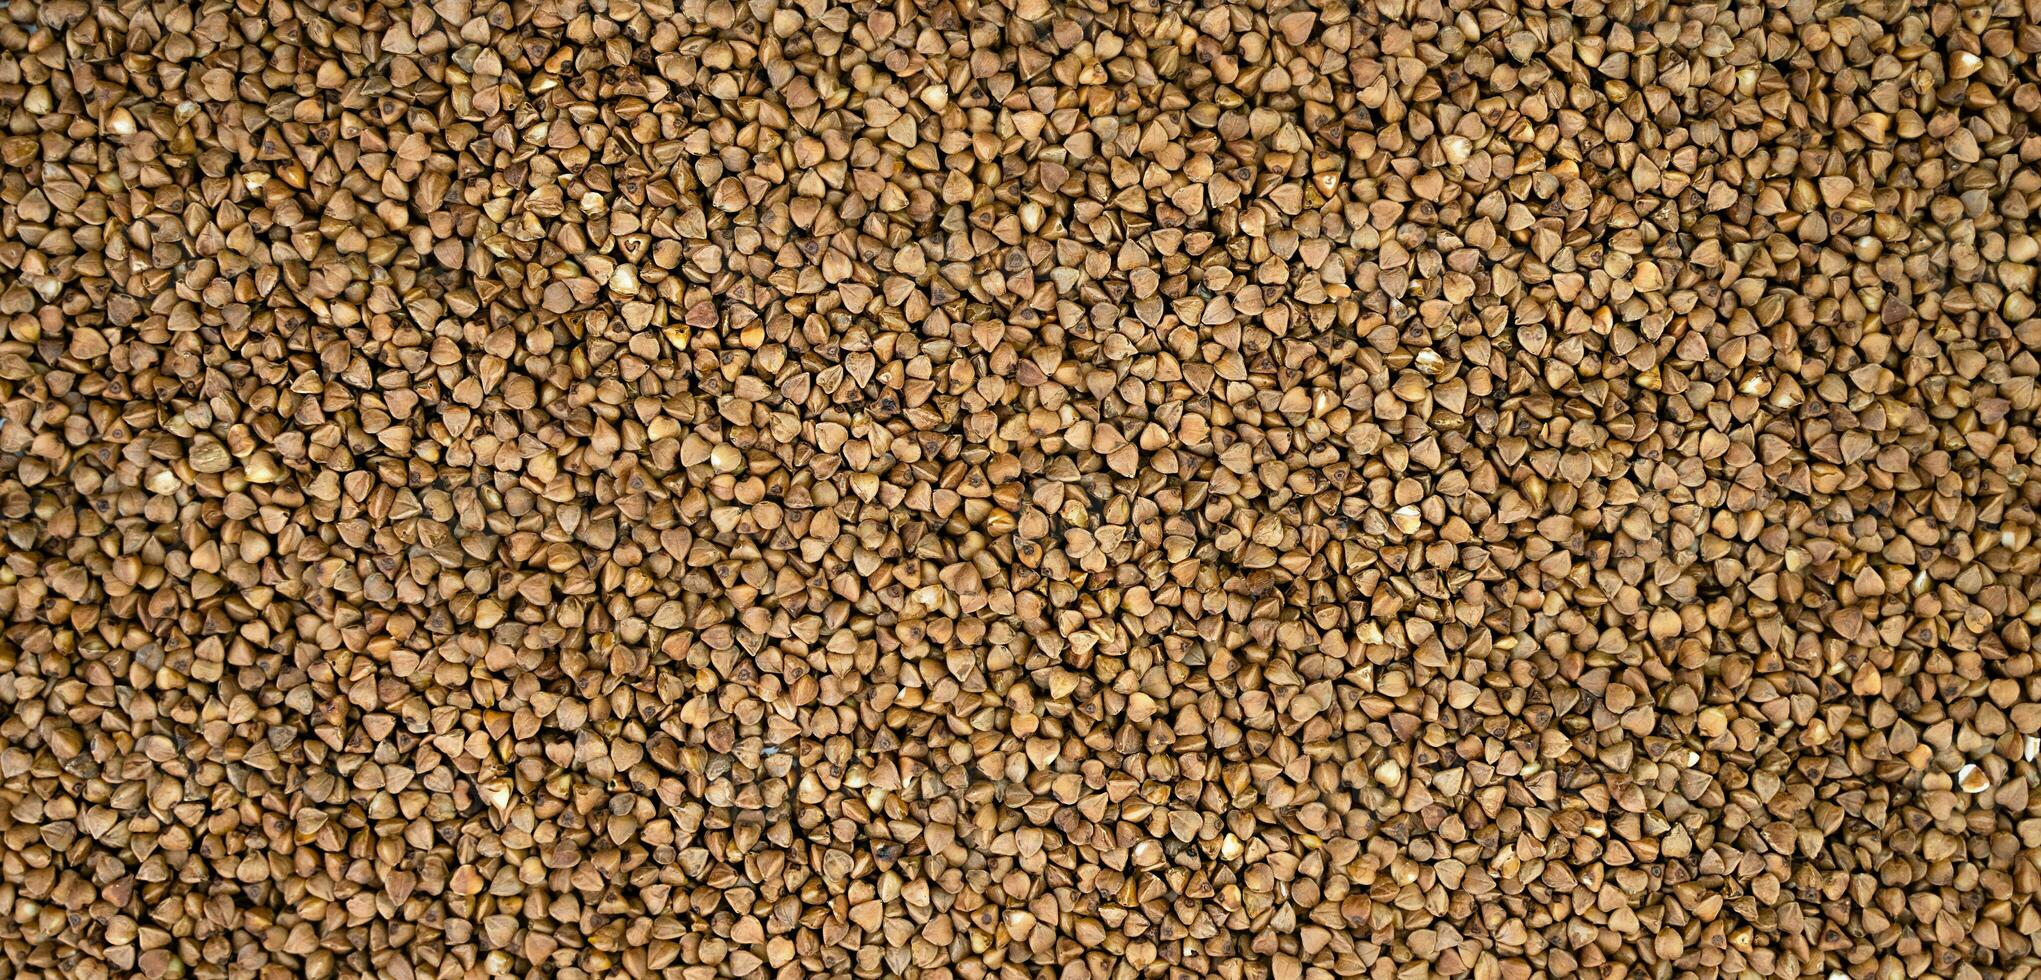 The texture of dry buckwheat. Dietary product. Natural abstract background. Banner. Top view. Selective focus. photo